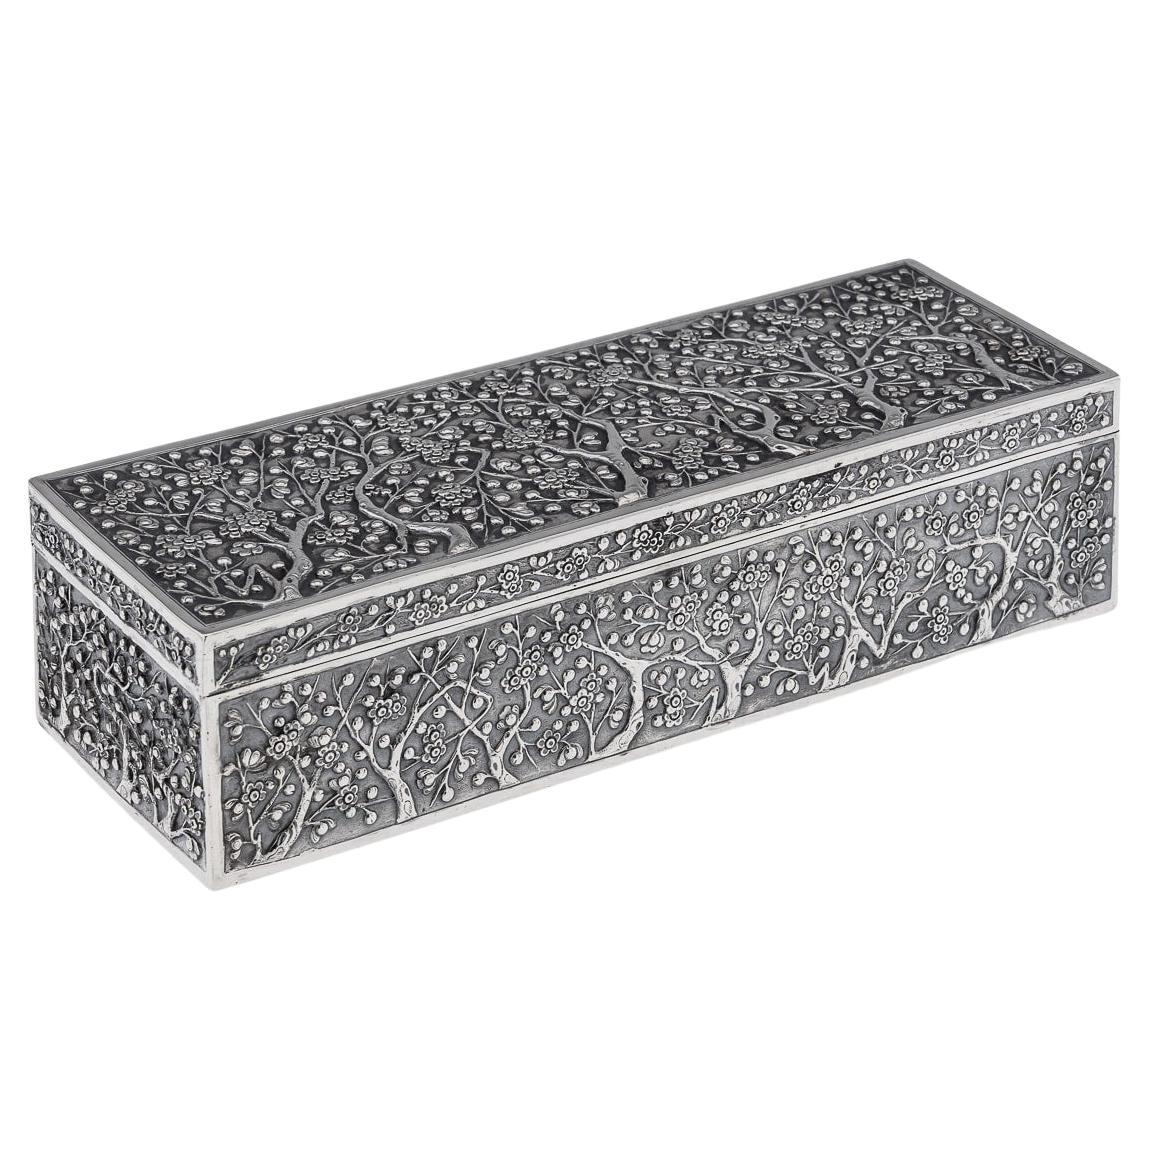 Antique 19th Century Chinese Silver Cherry Blossom Box, Wang Hing 1890 For Sale